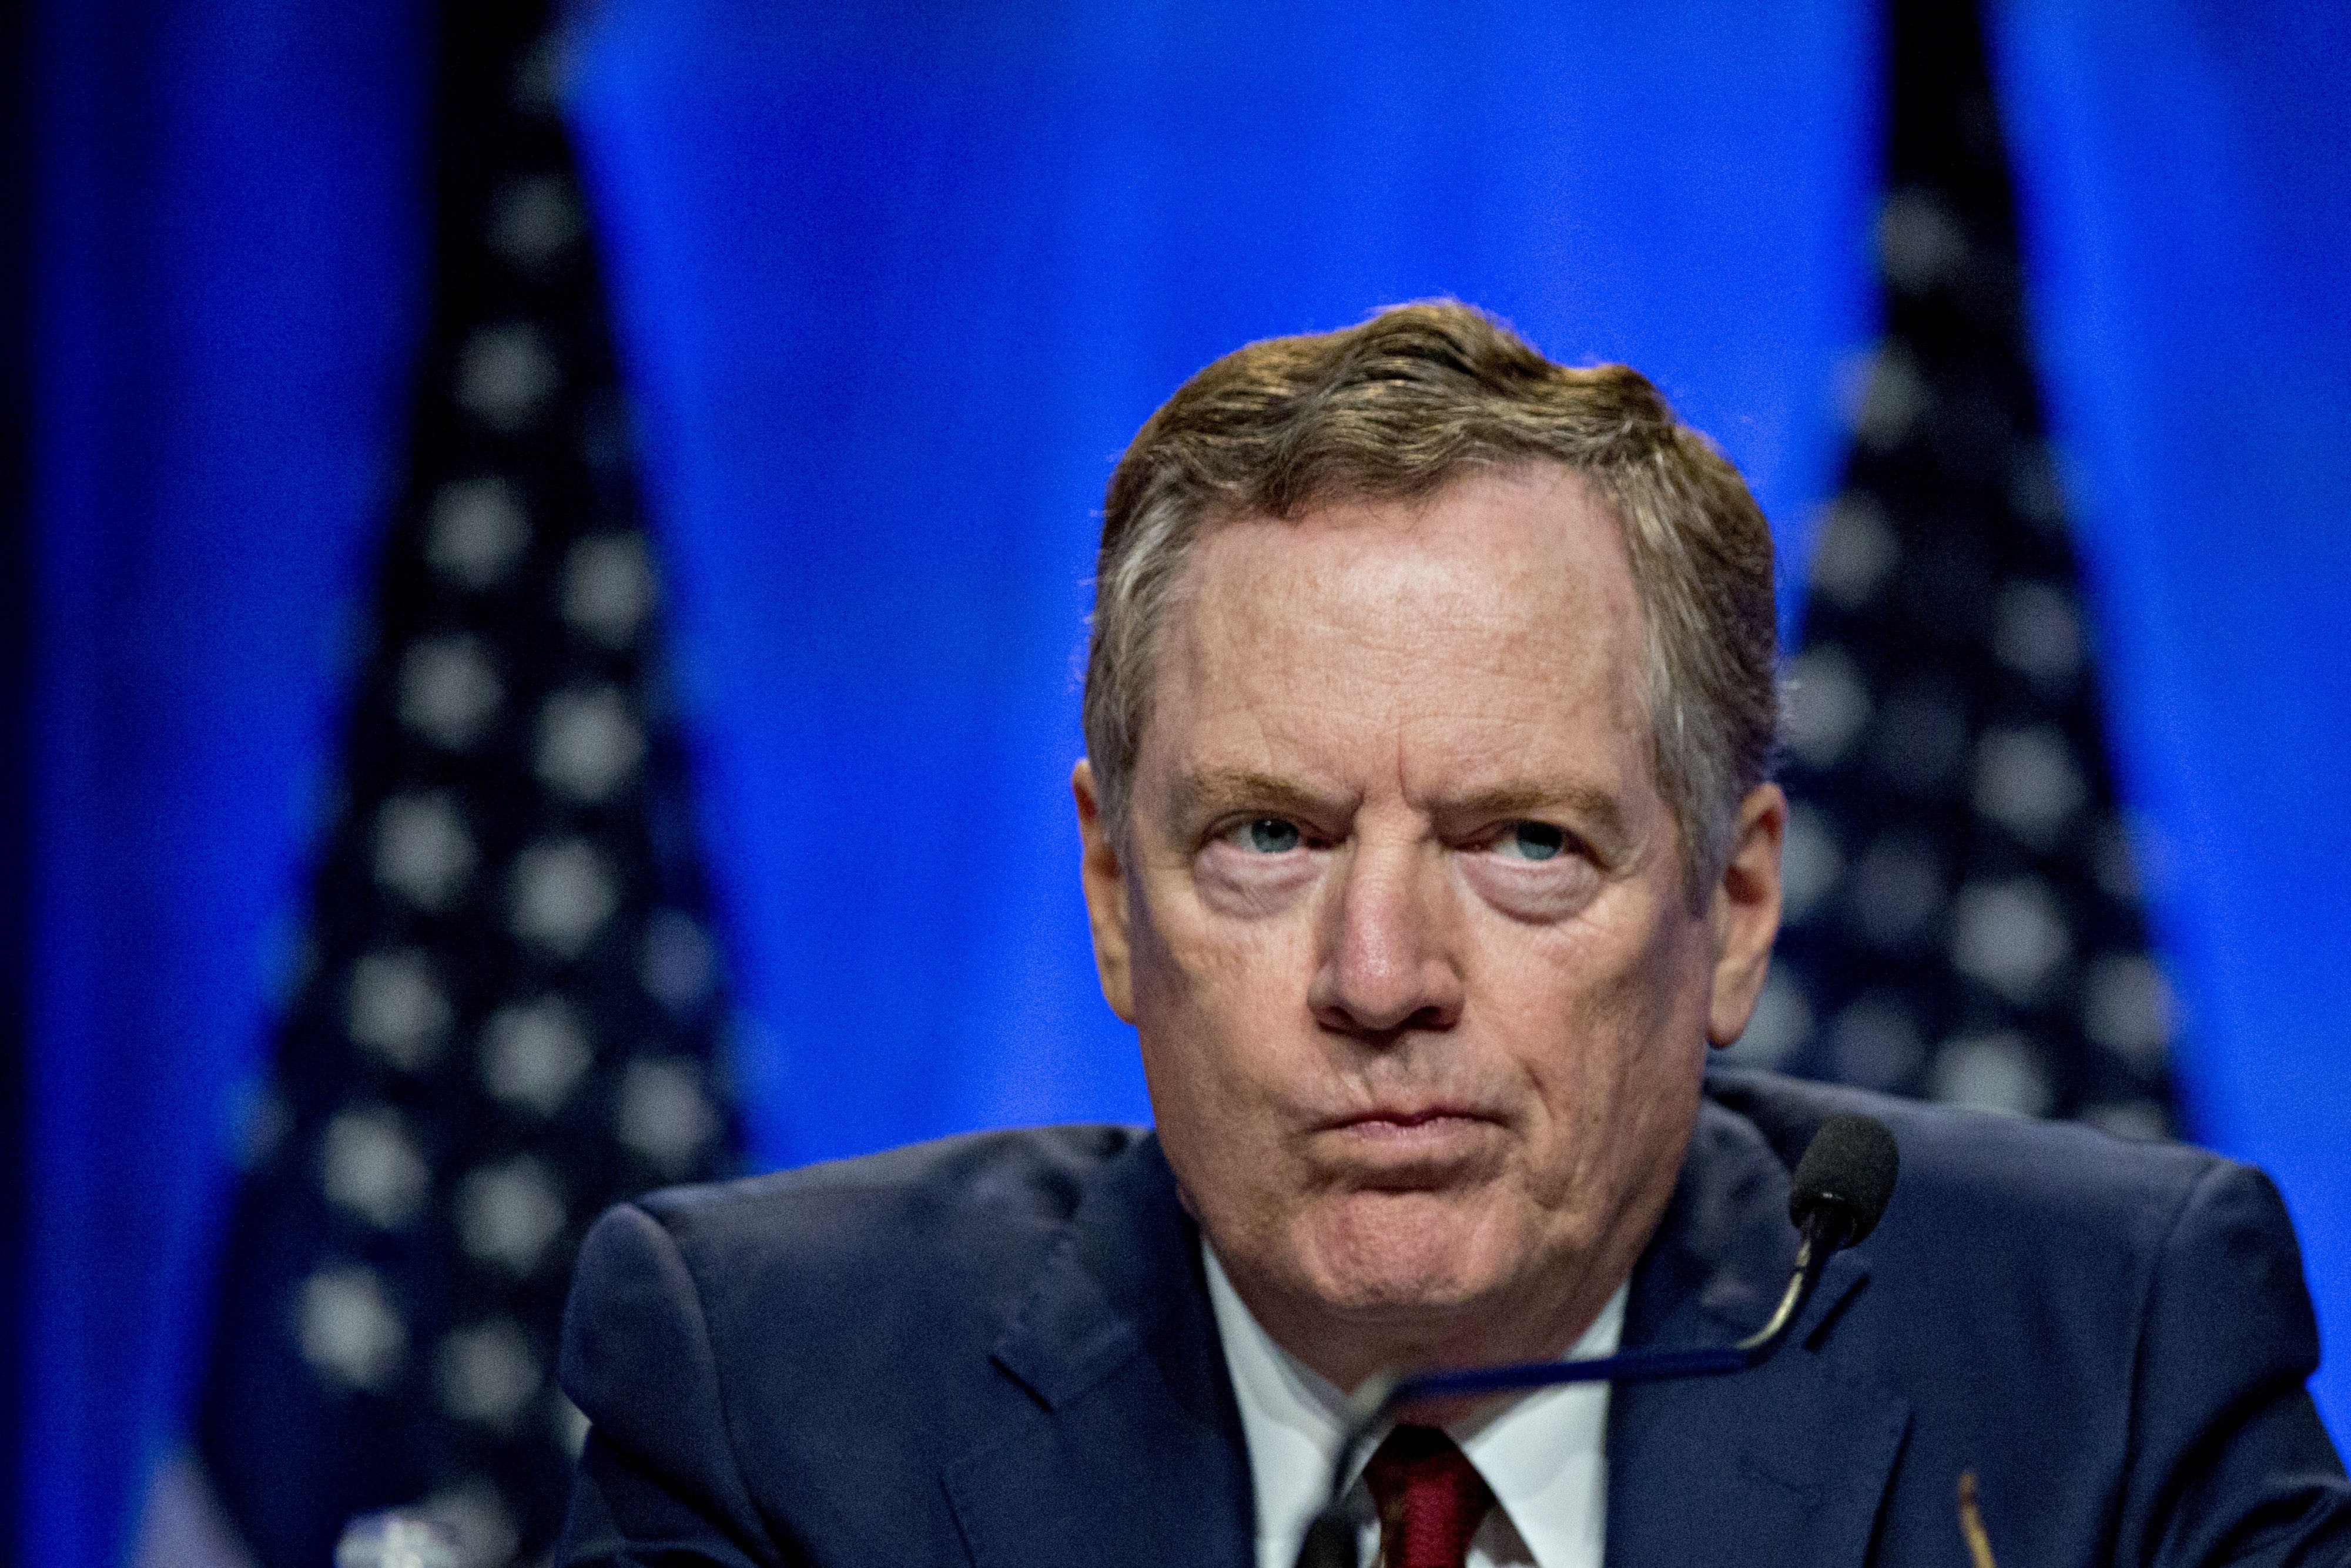 US Trade Representative Robert Lighthizer’s first impossible mission is perhaps to attempt to quantify the extent of any value lost through the allegedly unfair Chinese intellectual property policies. Photo: Bloomberg